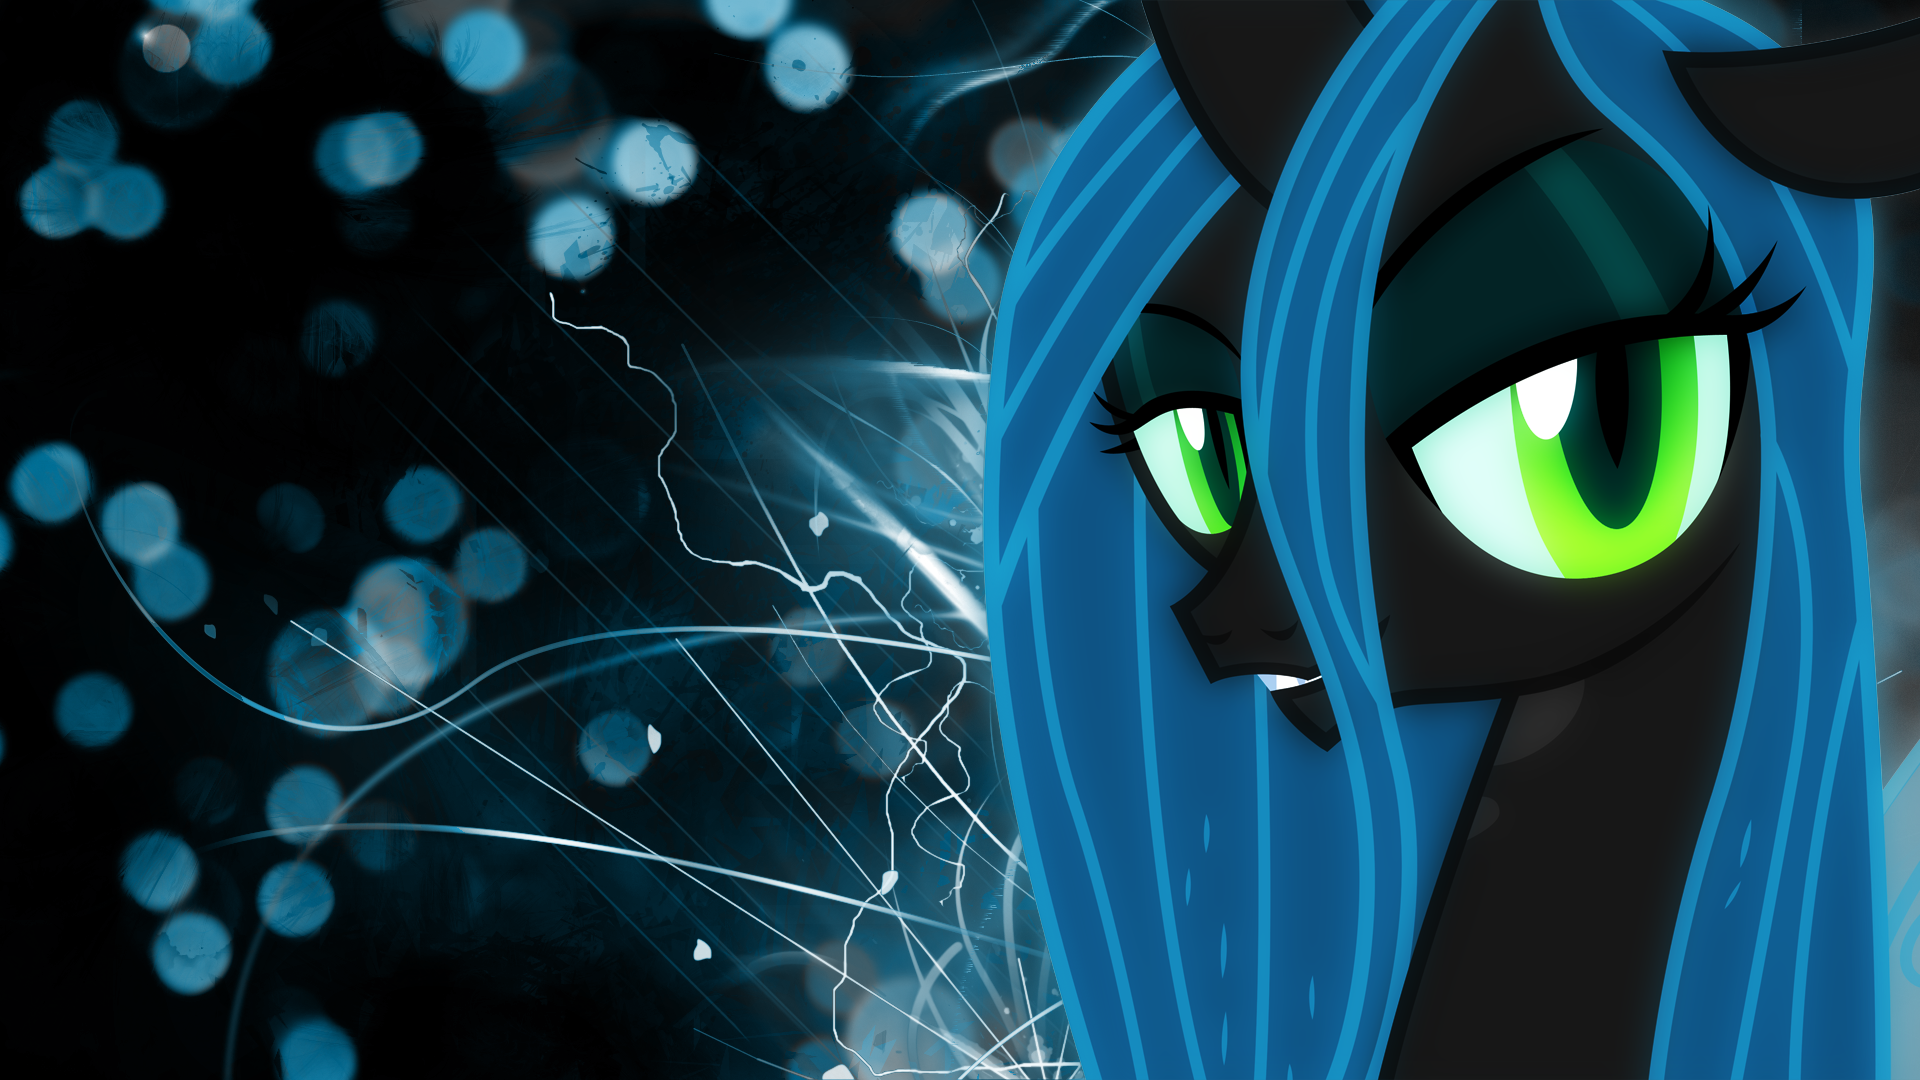 'The Great And Powerful Chrysalis' Wallpaper by BlueDragonHans